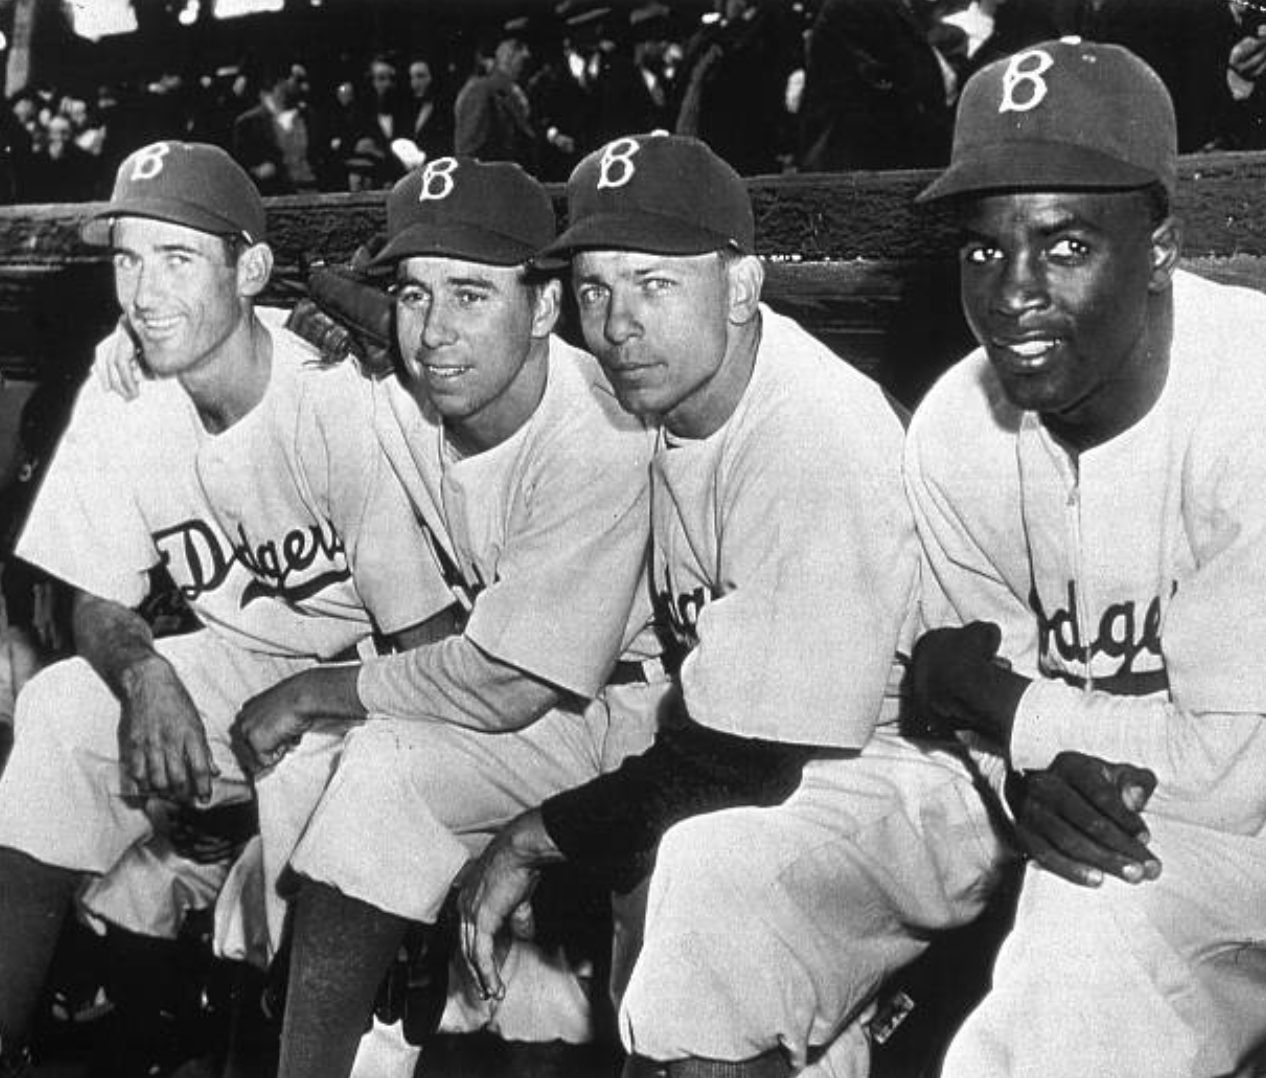 The 1947 Brooklyn Dodger infield was composed of (L-R) John Jorgenson, Pee Wee Reese, Eddie Stanky, and Jackie Robinson (SABR-RUCKER ARCHIVE)